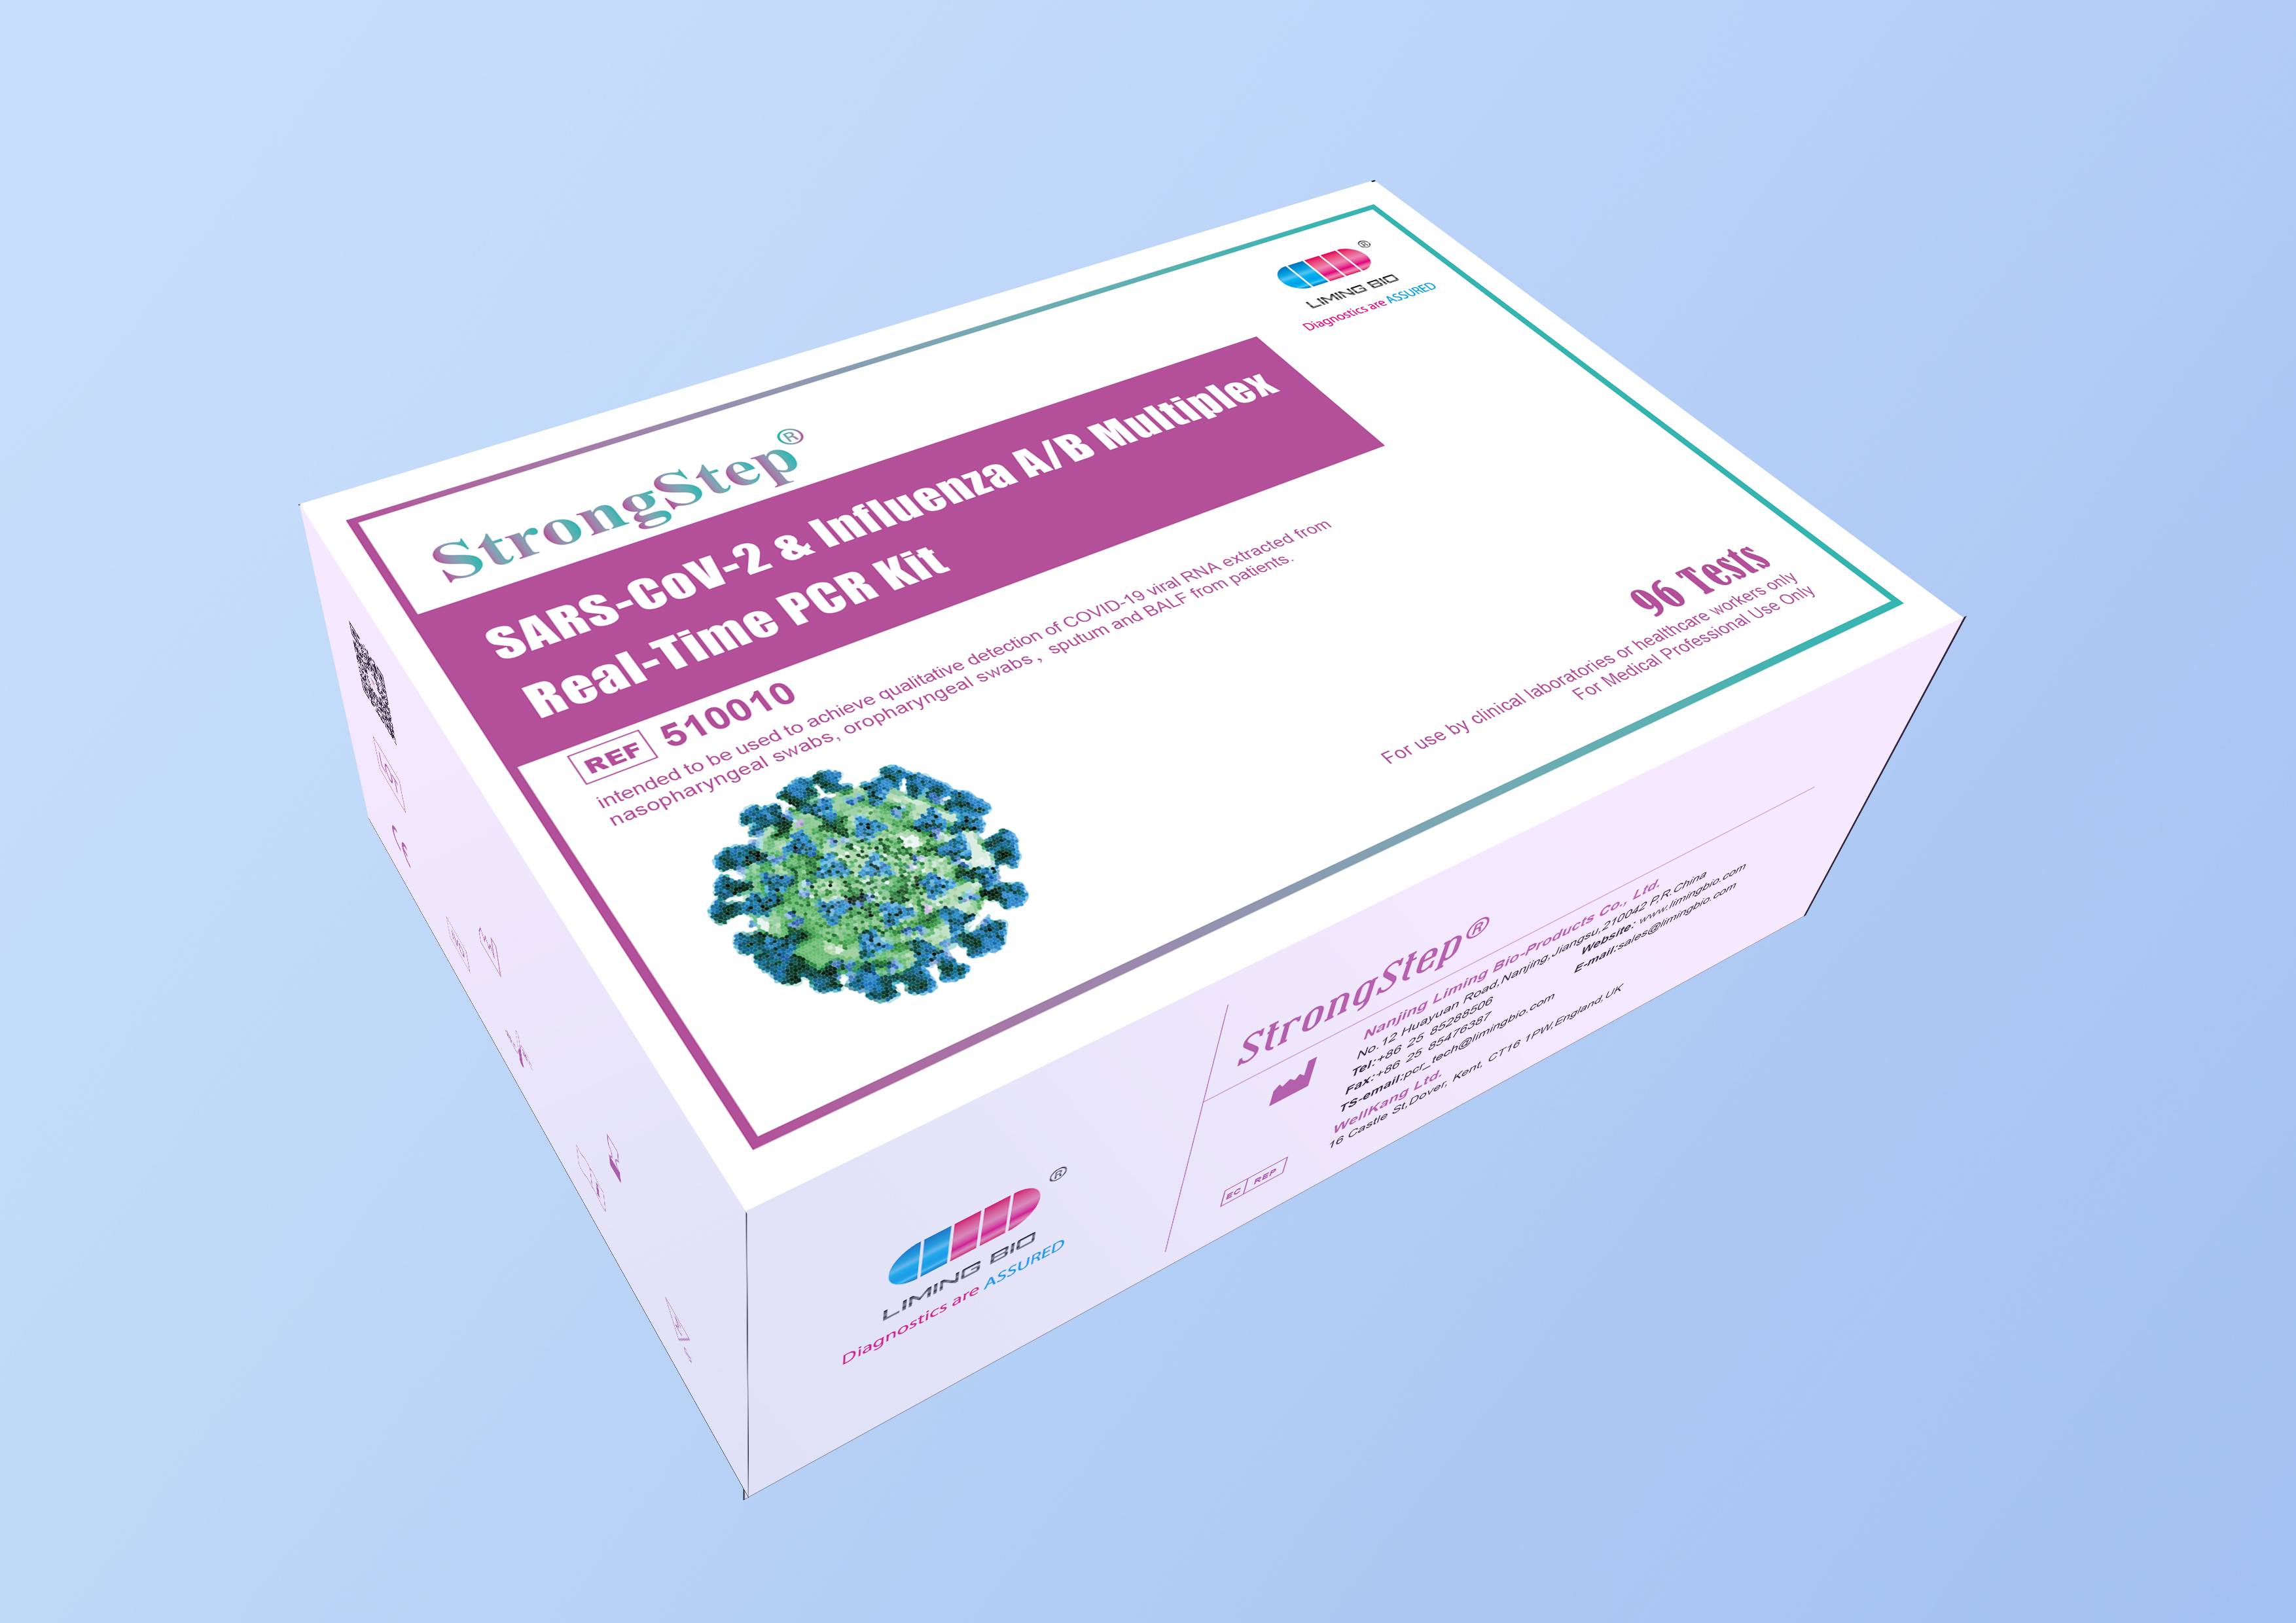 SARS-CoV-2 & Influenza A/B Multiplex Real-Time PCR Kit Featured Image